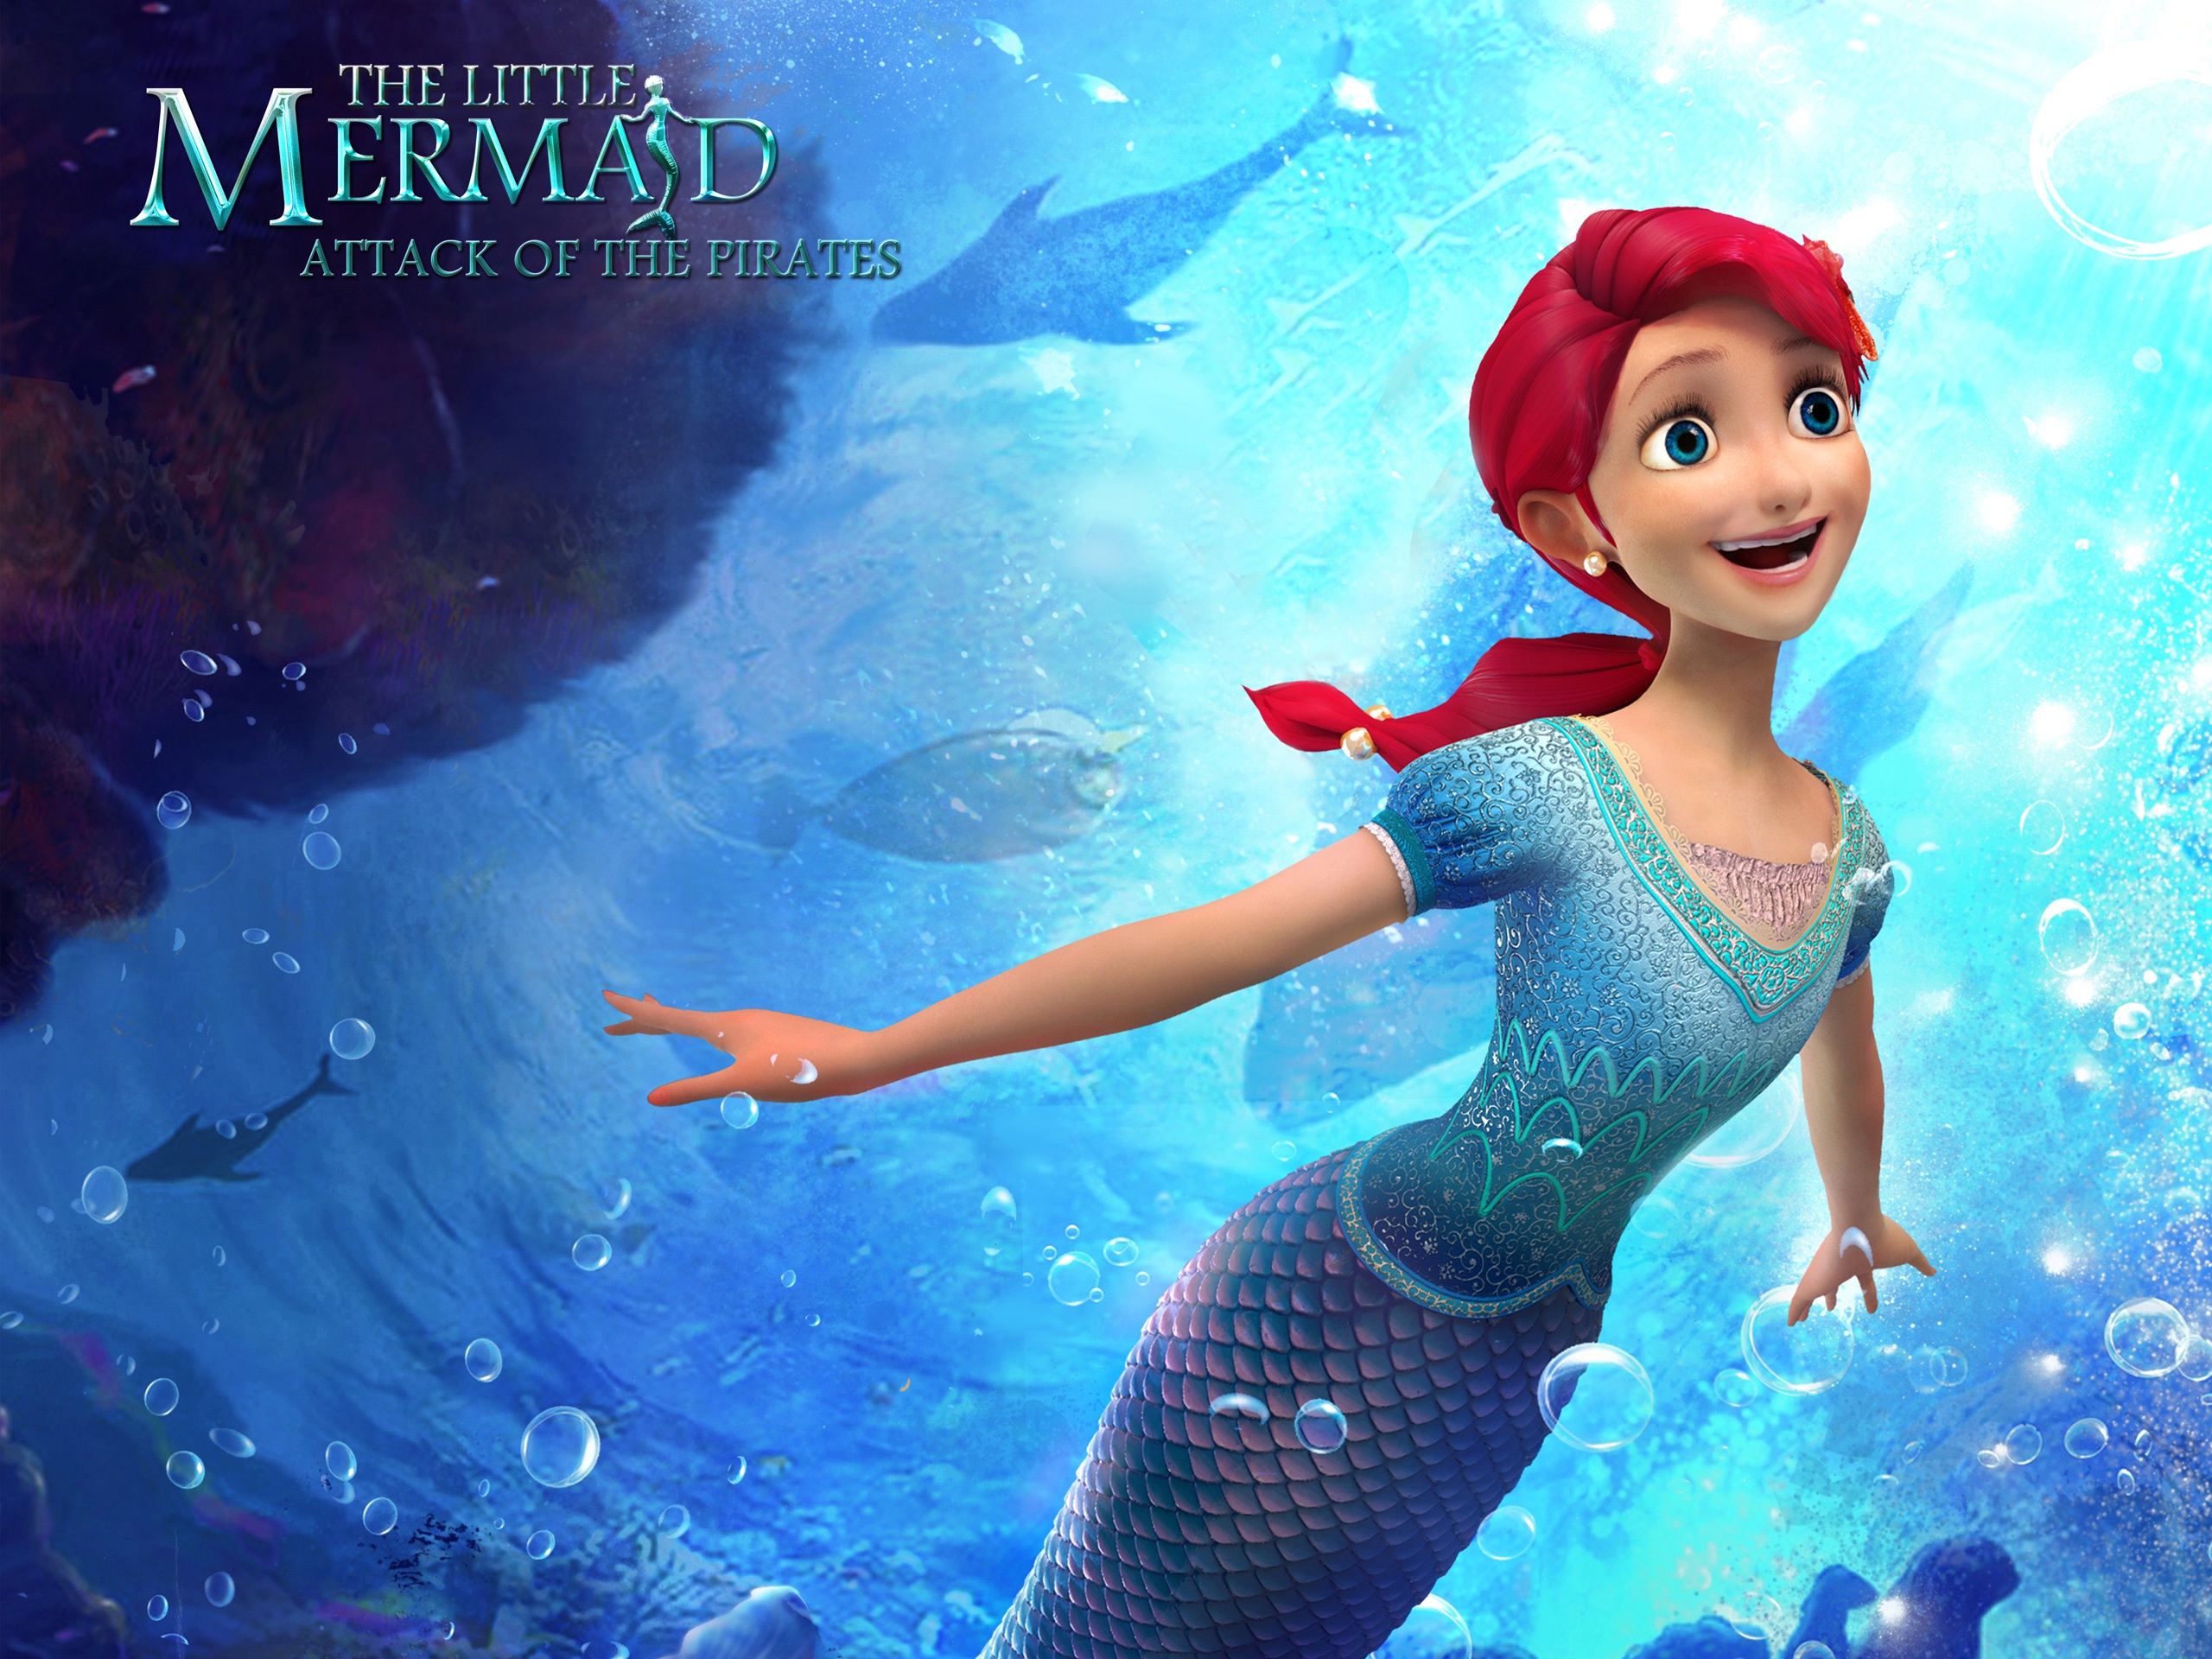 Download wallpaper for 320x480 resolution The Little Mermaid Attack